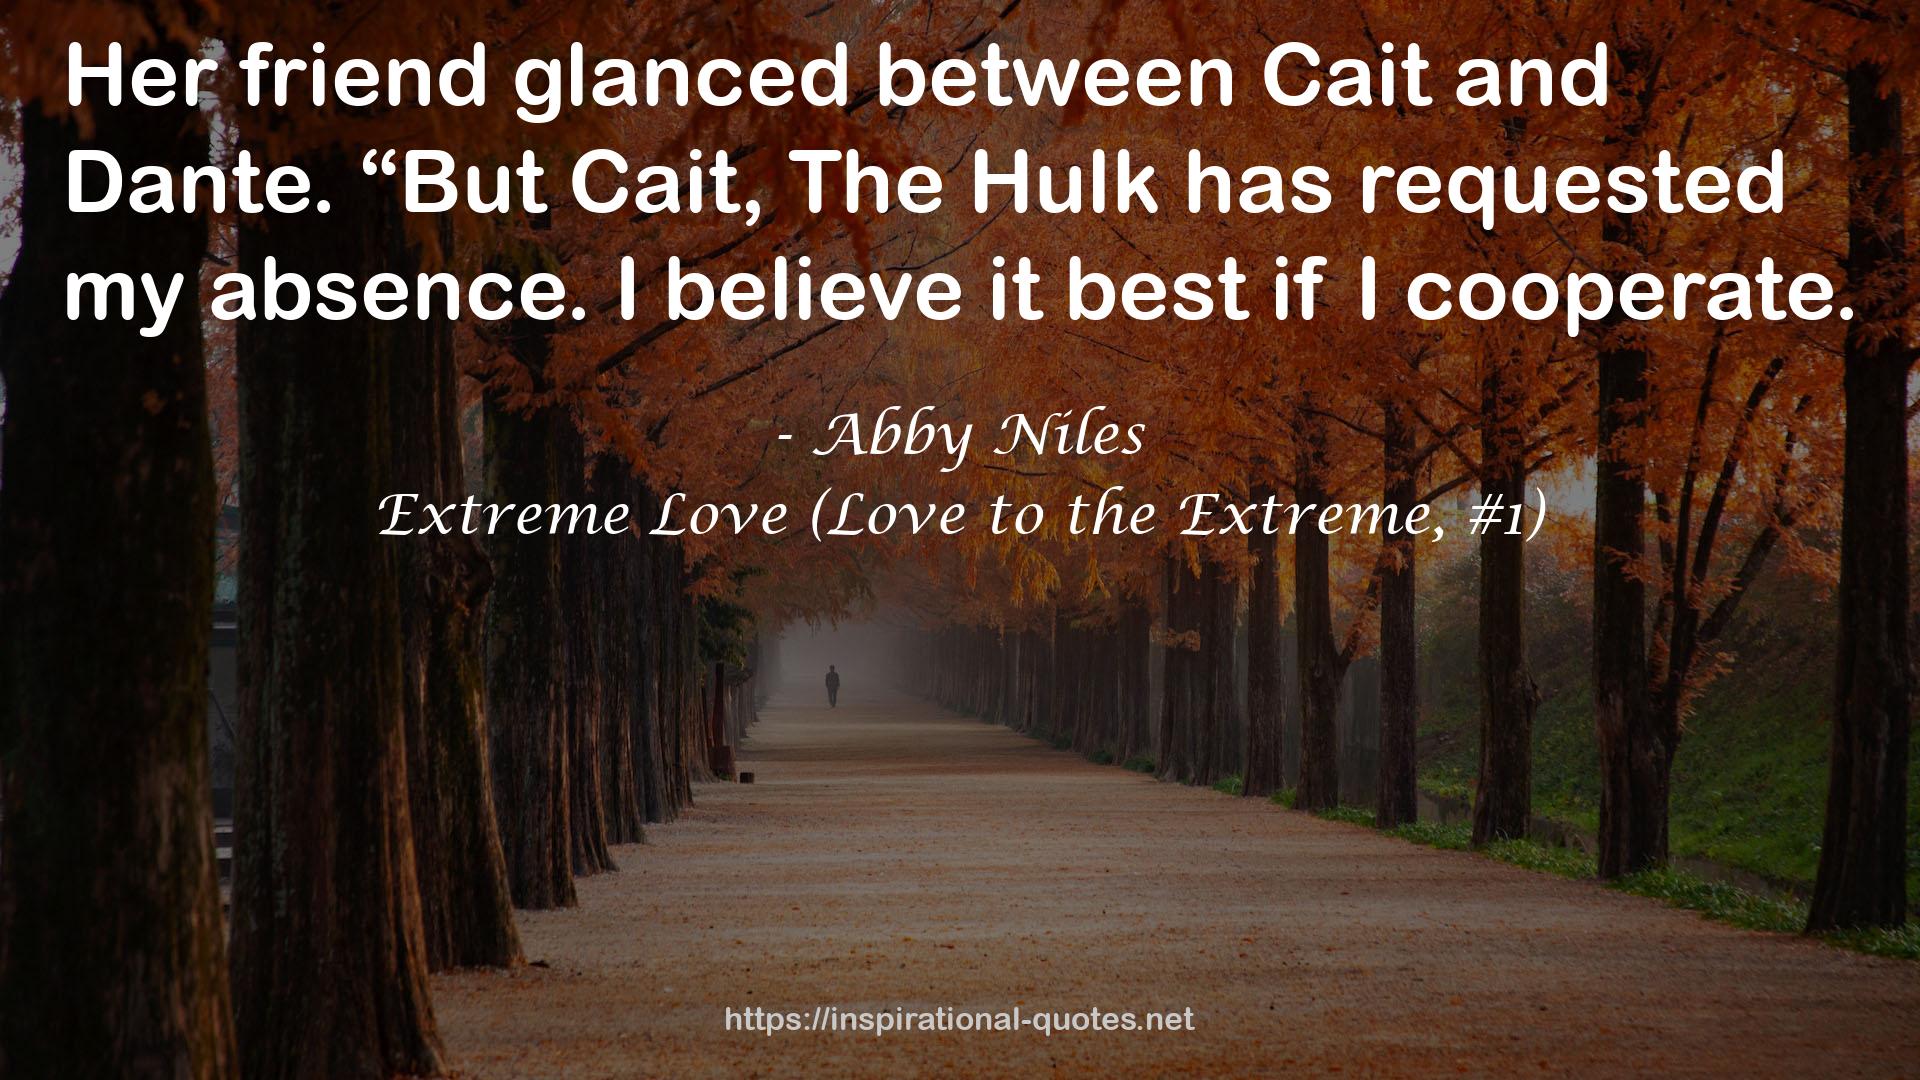 Extreme Love (Love to the Extreme, #1) QUOTES